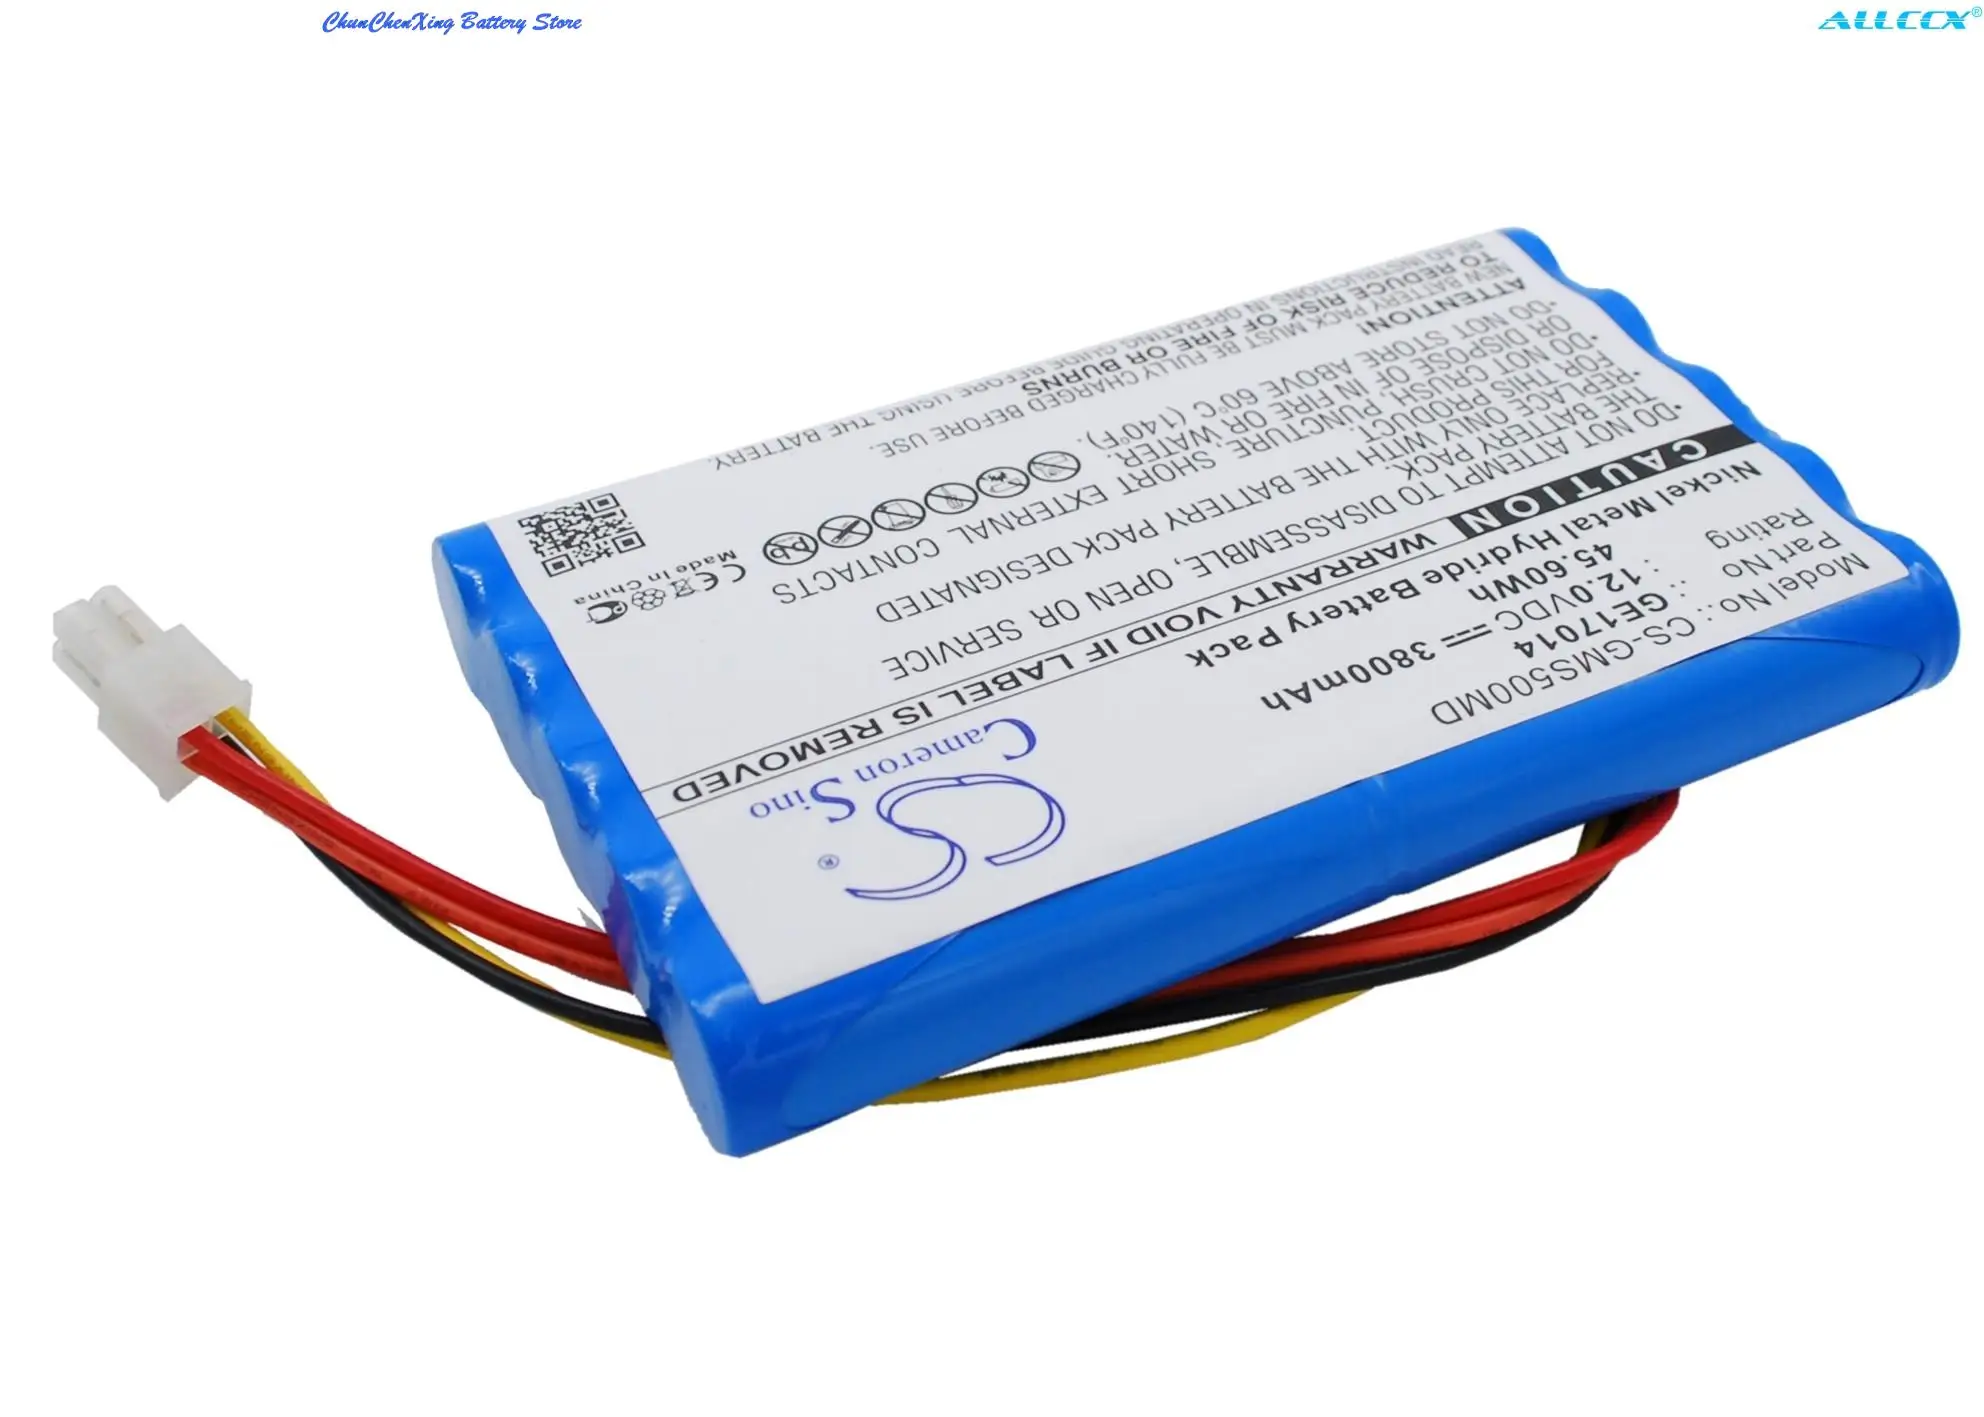 

GreenBattey 3800mAh Battery for GE Datex-Ohmeda S5,S5CAM, S5 PATIE, S/5, S/5CAM,S/5 PATIENT MONITOR,S5 PATIENT MONITOR